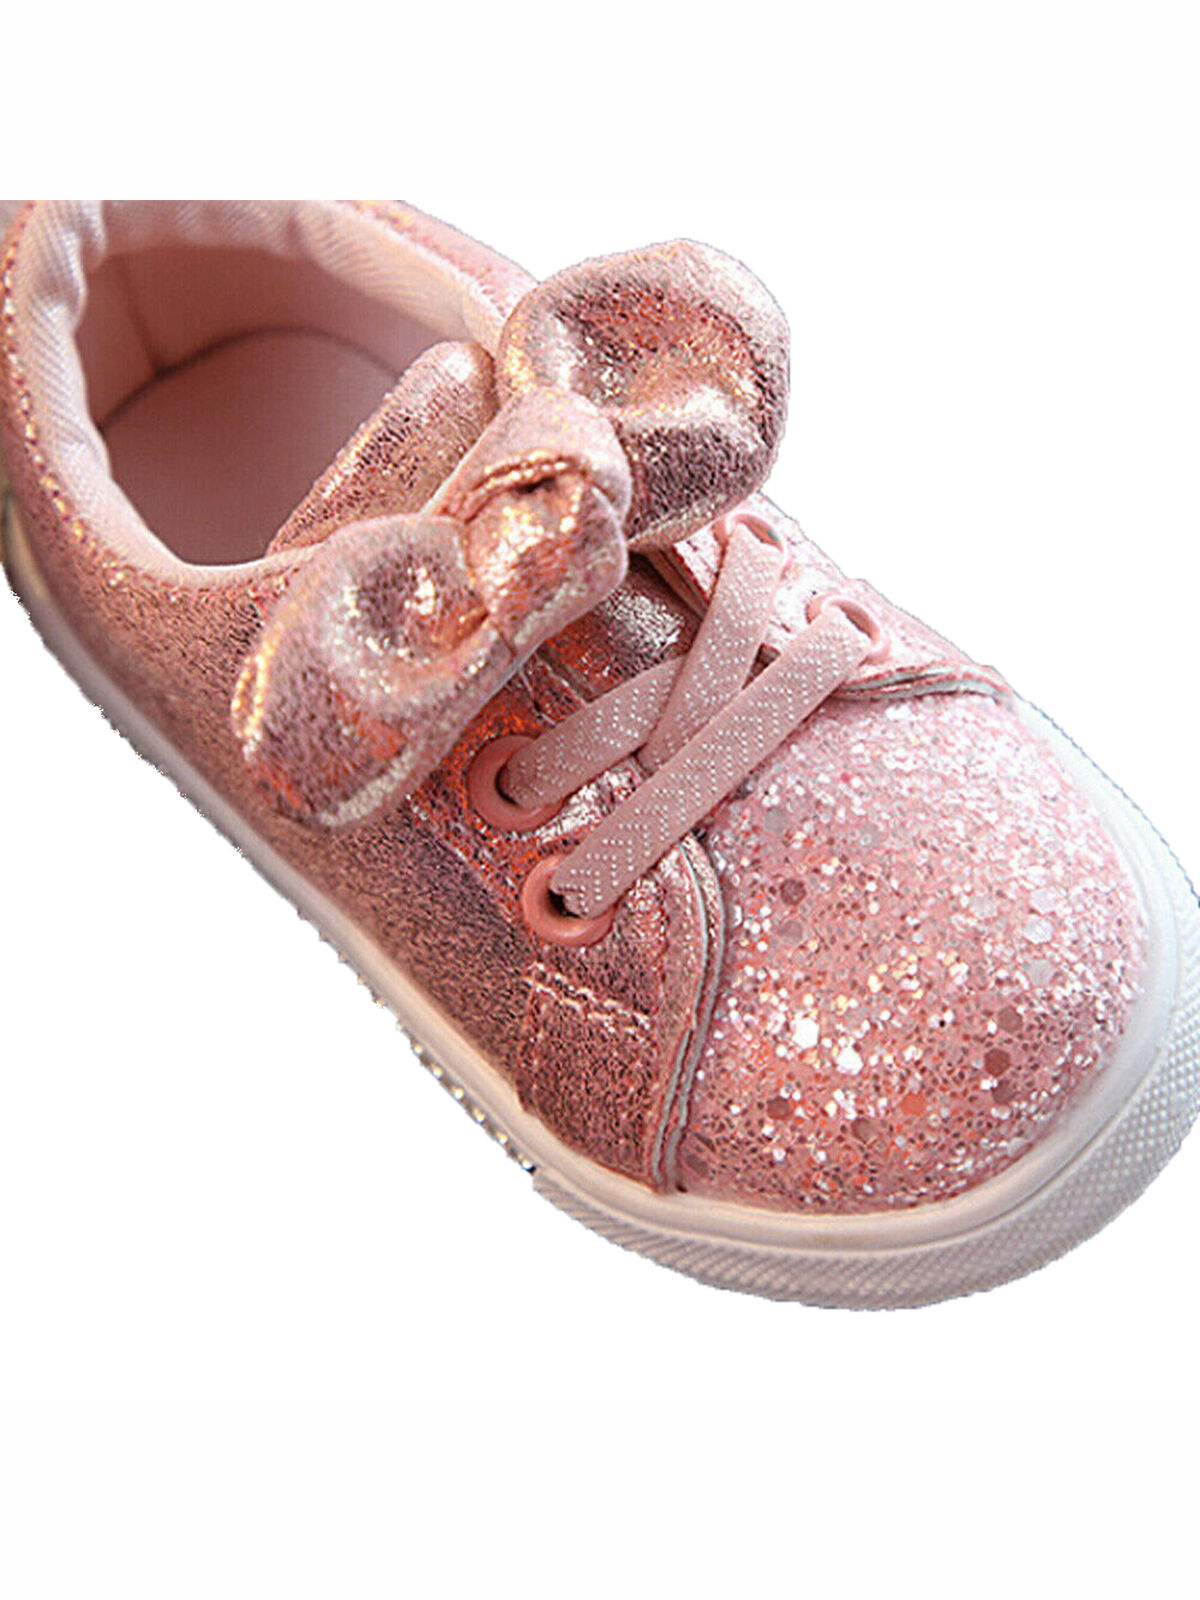 Cute Girls Casual Shoes Sneakers Toddler Baby Girls Bow Sequin Crib Trend Casual Shoes Kids Children Anti Slip Pink Dress Shoes - image 5 of 6